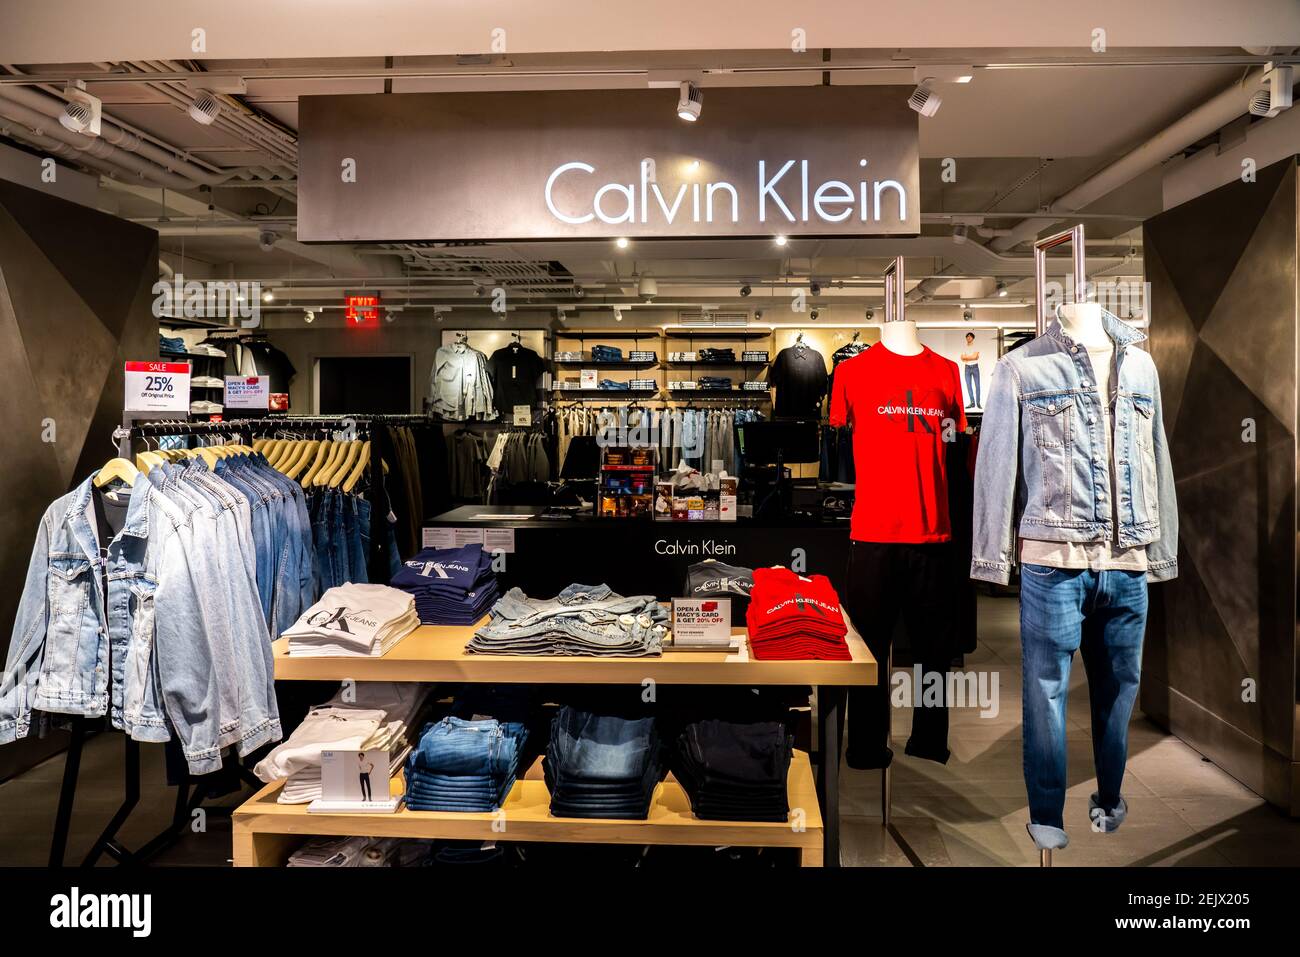 American fashion house, Calvin Klein seen in a Macy's department store ...